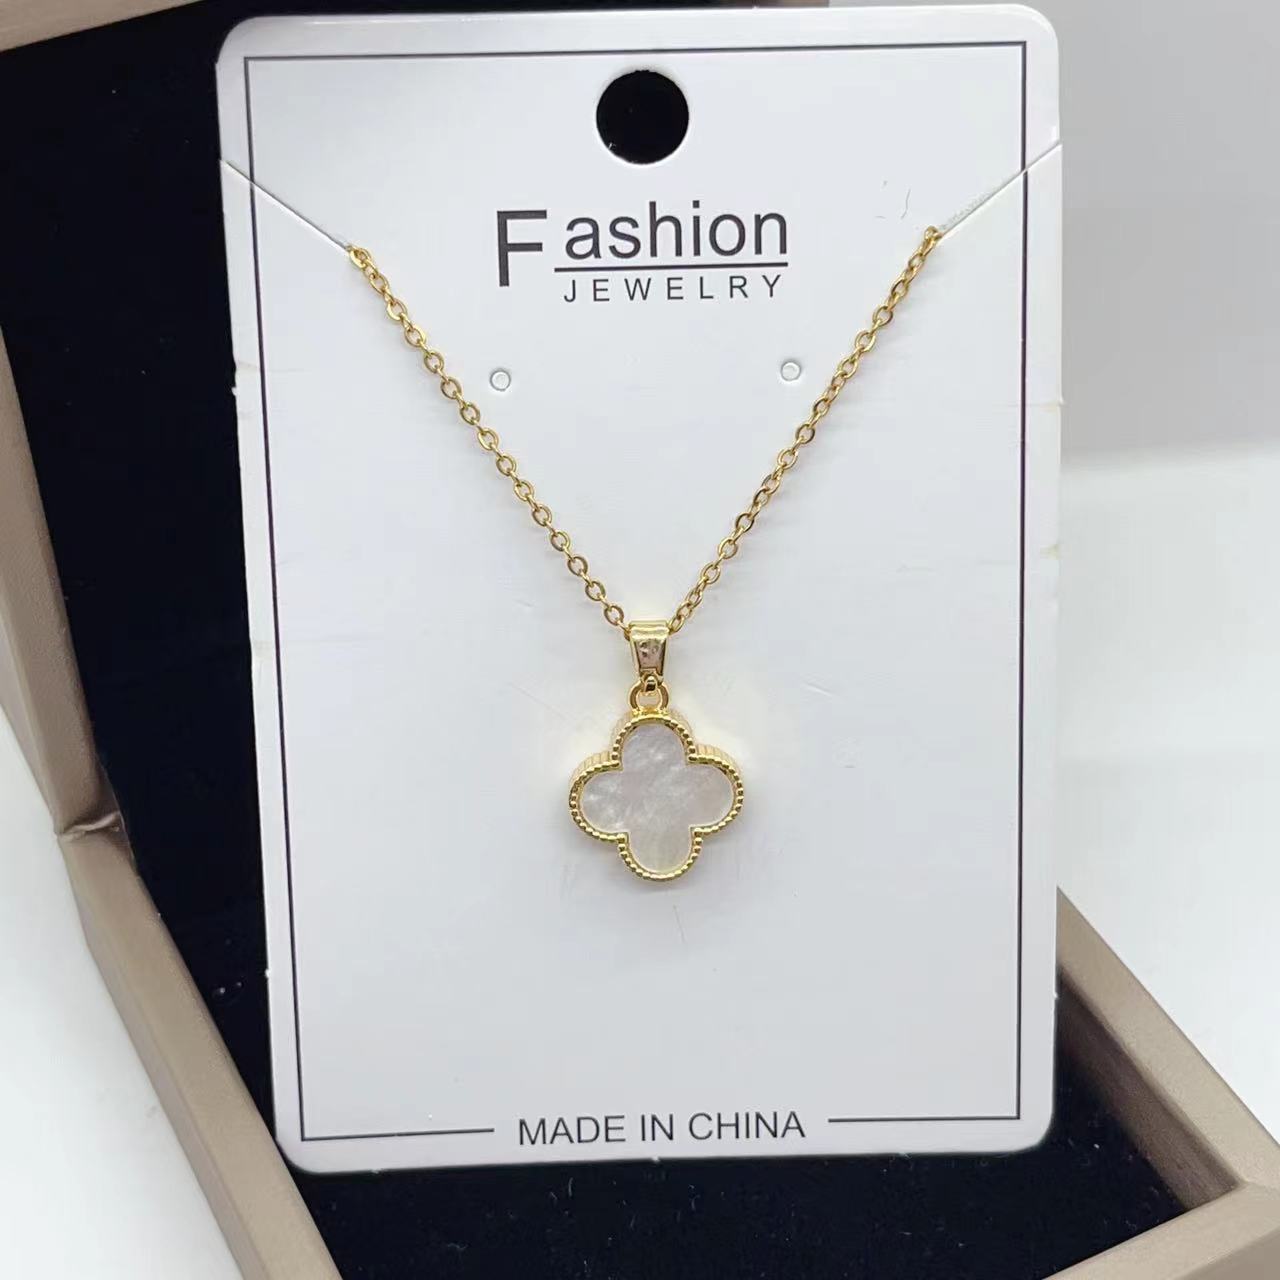 Classic Hot Sale Simple Temperament Four-Leaf Clover Necklace with Micro Inlaid Zircon All-Match Clavicle Chain on Both Sides